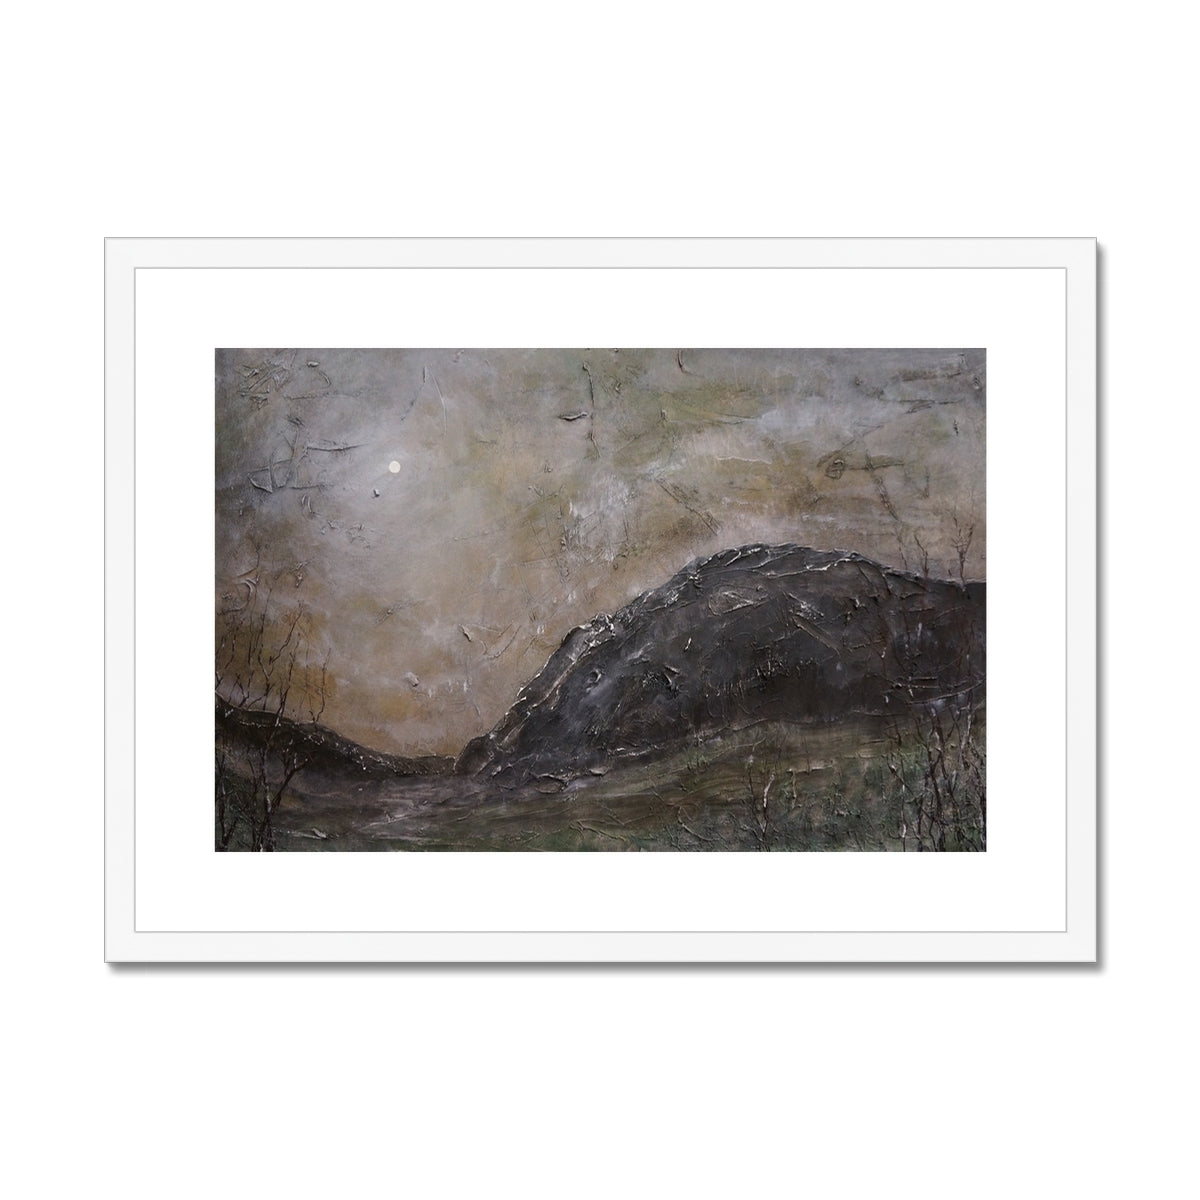 Glen Nevis Moonlight Painting | Framed & Mounted Prints From Scotland-Framed & Mounted Prints-Scottish Lochs & Mountains Art Gallery-A2 Landscape-White Frame-Paintings, Prints, Homeware, Art Gifts From Scotland By Scottish Artist Kevin Hunter